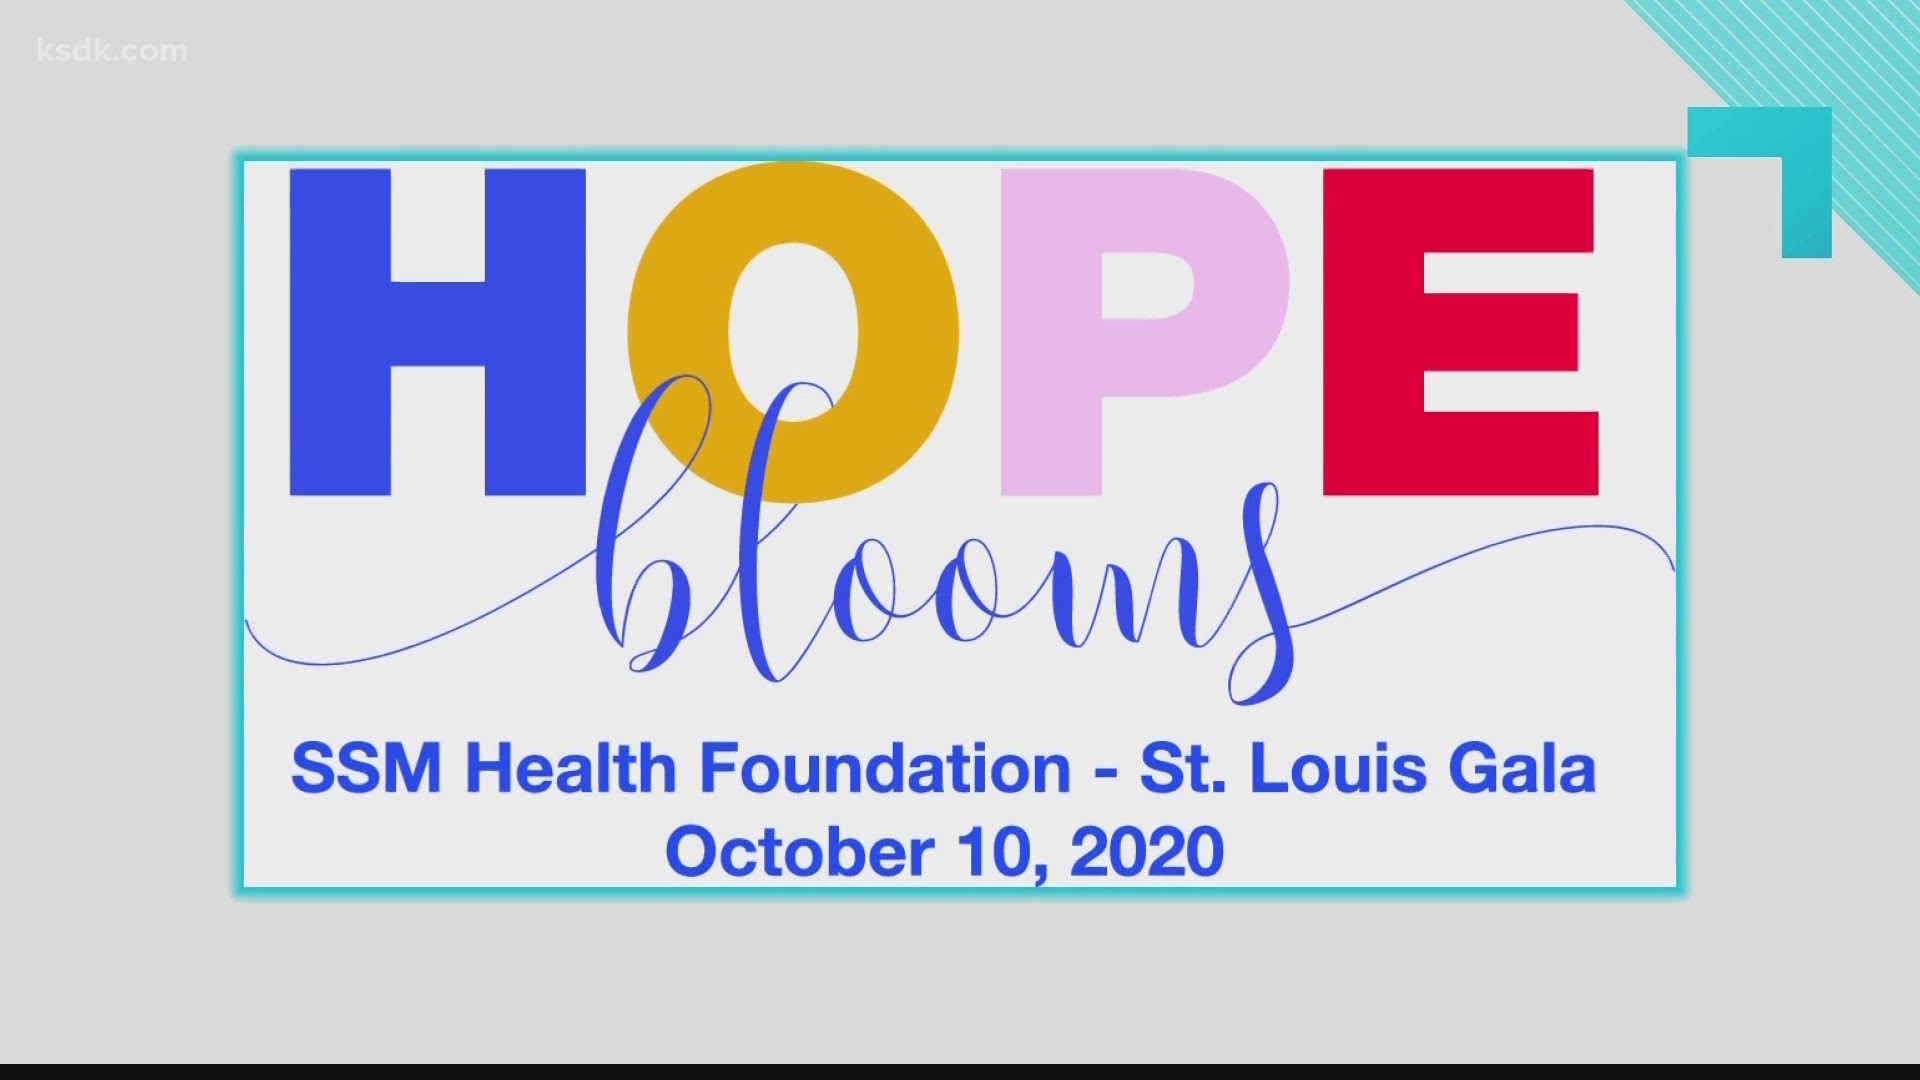 SSM Health Foundation St. Louis’ virtual gala Hope Blooms aims to raise money for cancer research, patients, and more.